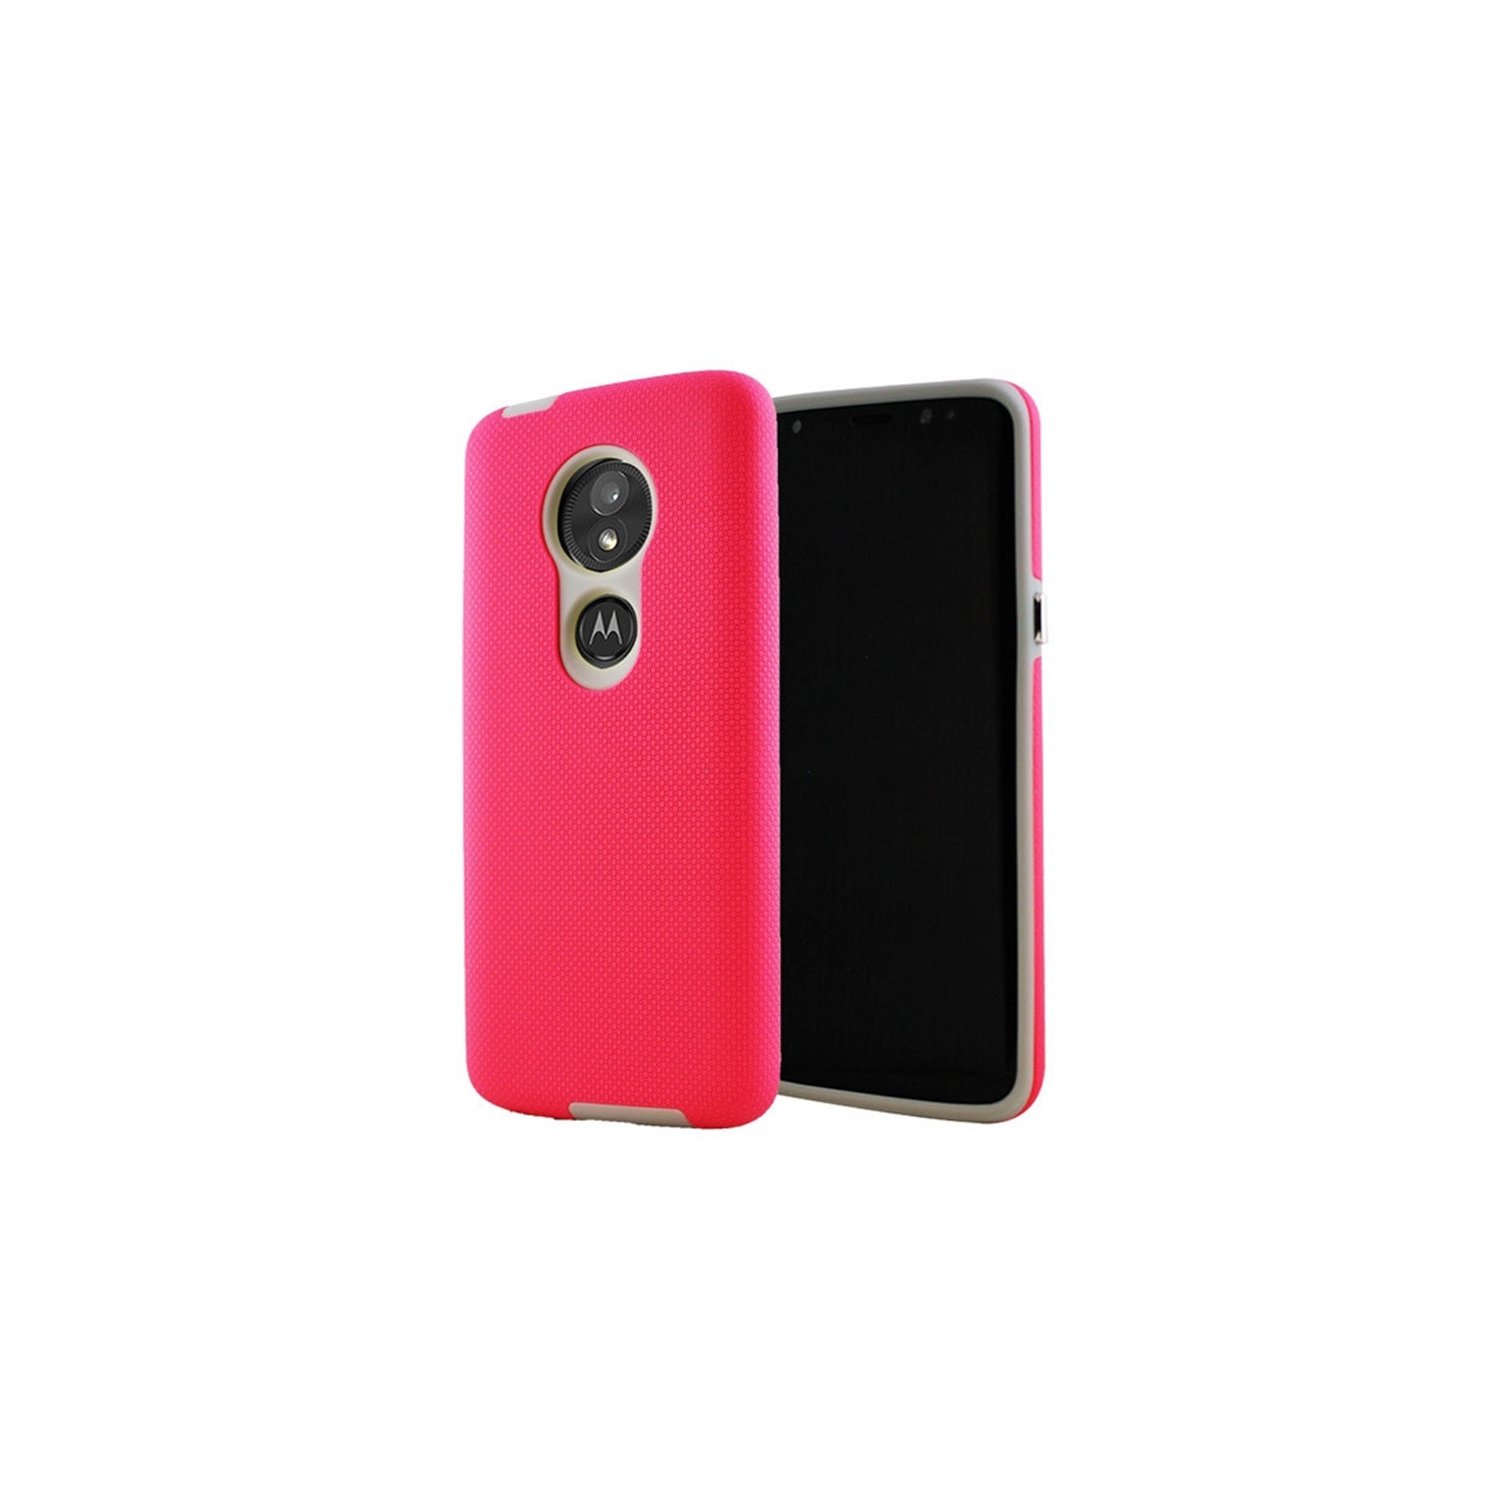 【CSmart】 Slim Fitted Hybrid Hard PC Shell Shockproof Scratch Resistant Case Cover for Motorola Moto E5 Play, Hot Pink